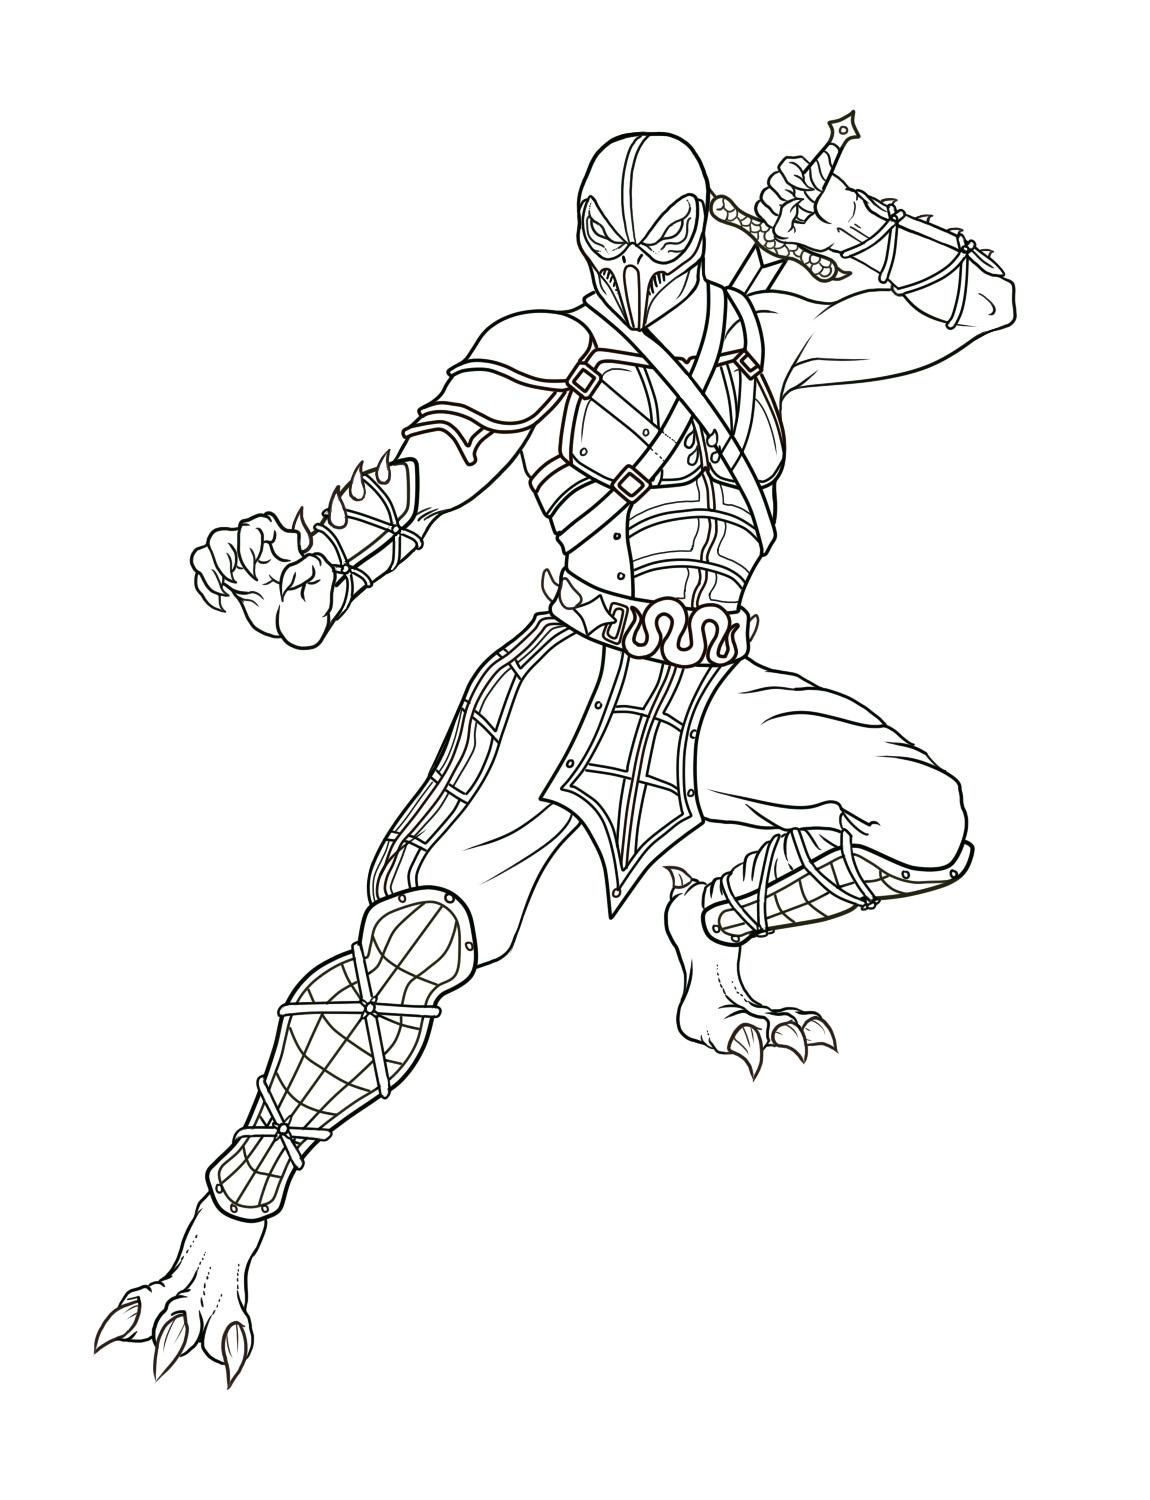 Coloring Pages of Mortal Kombat